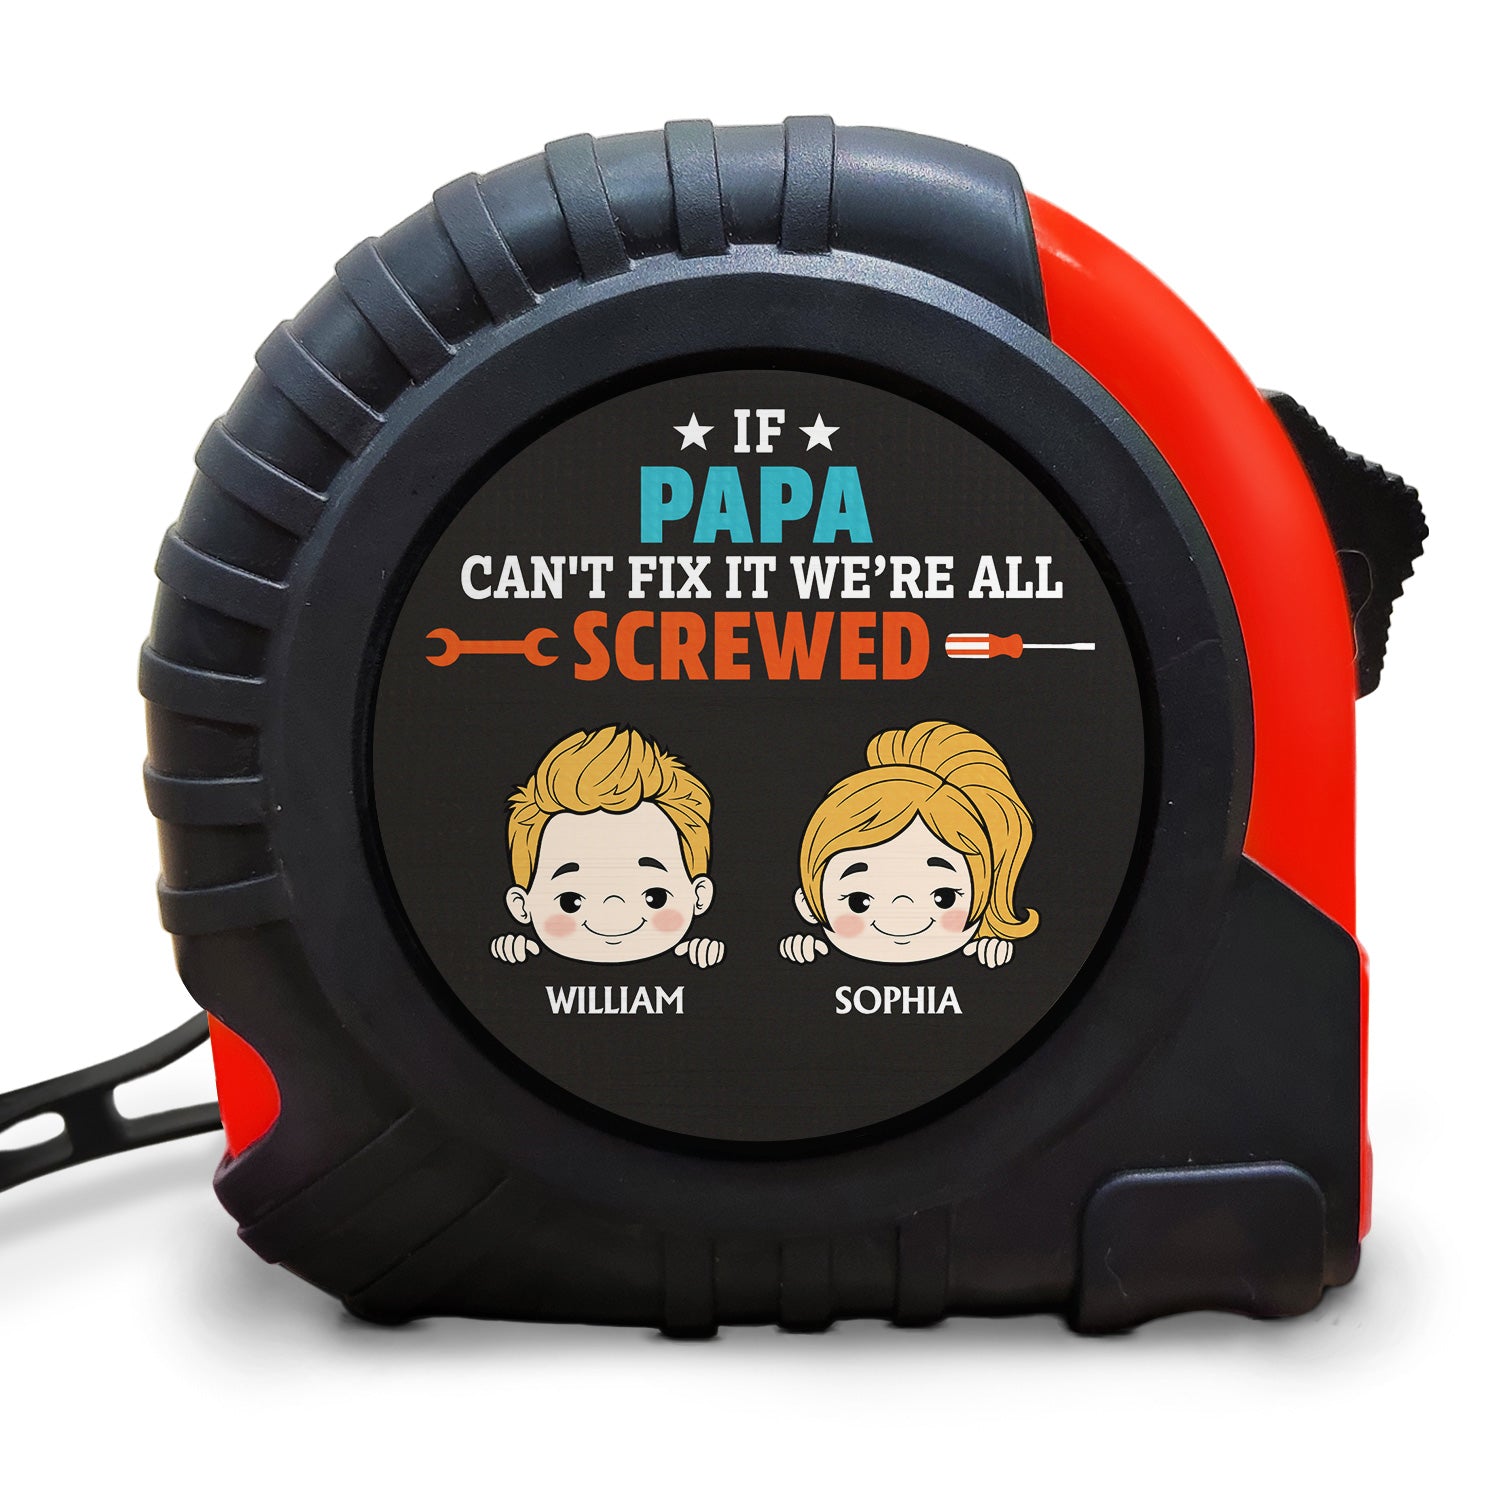 If Papa Can't Fixed It We're All Screwed - Funny Gift For Grandpa, Dad, Father - Personalized Tape Measure